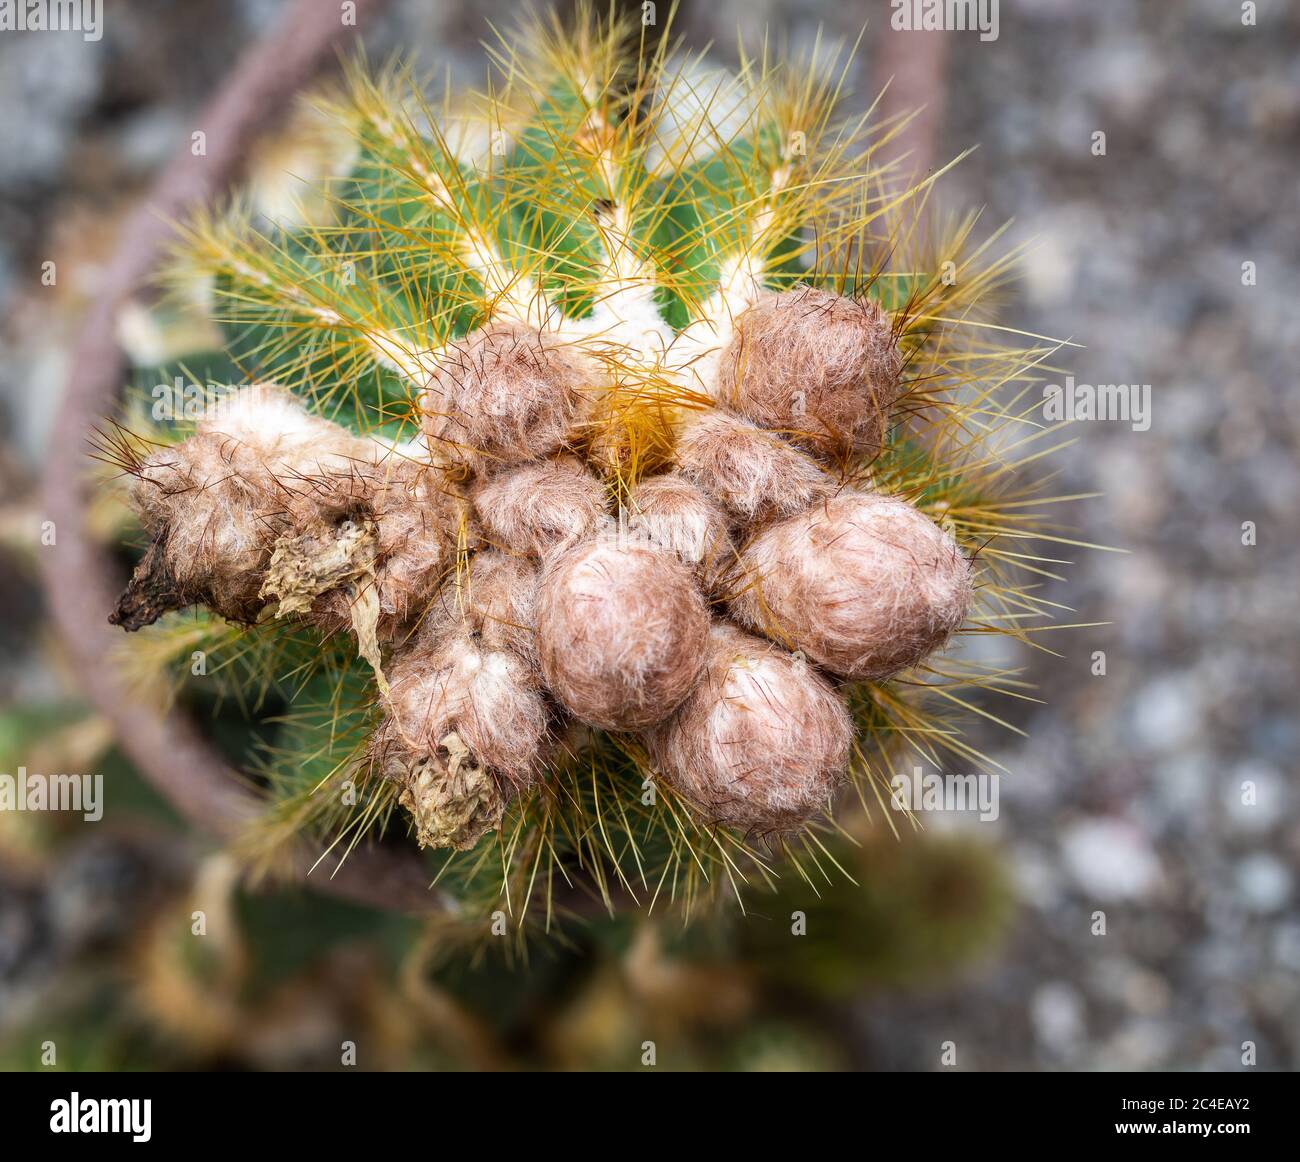 Close-up of the spiky, woolly cactus Eriocephala Magnifica, a native plant in the cactaceae family from South America Stock Photo